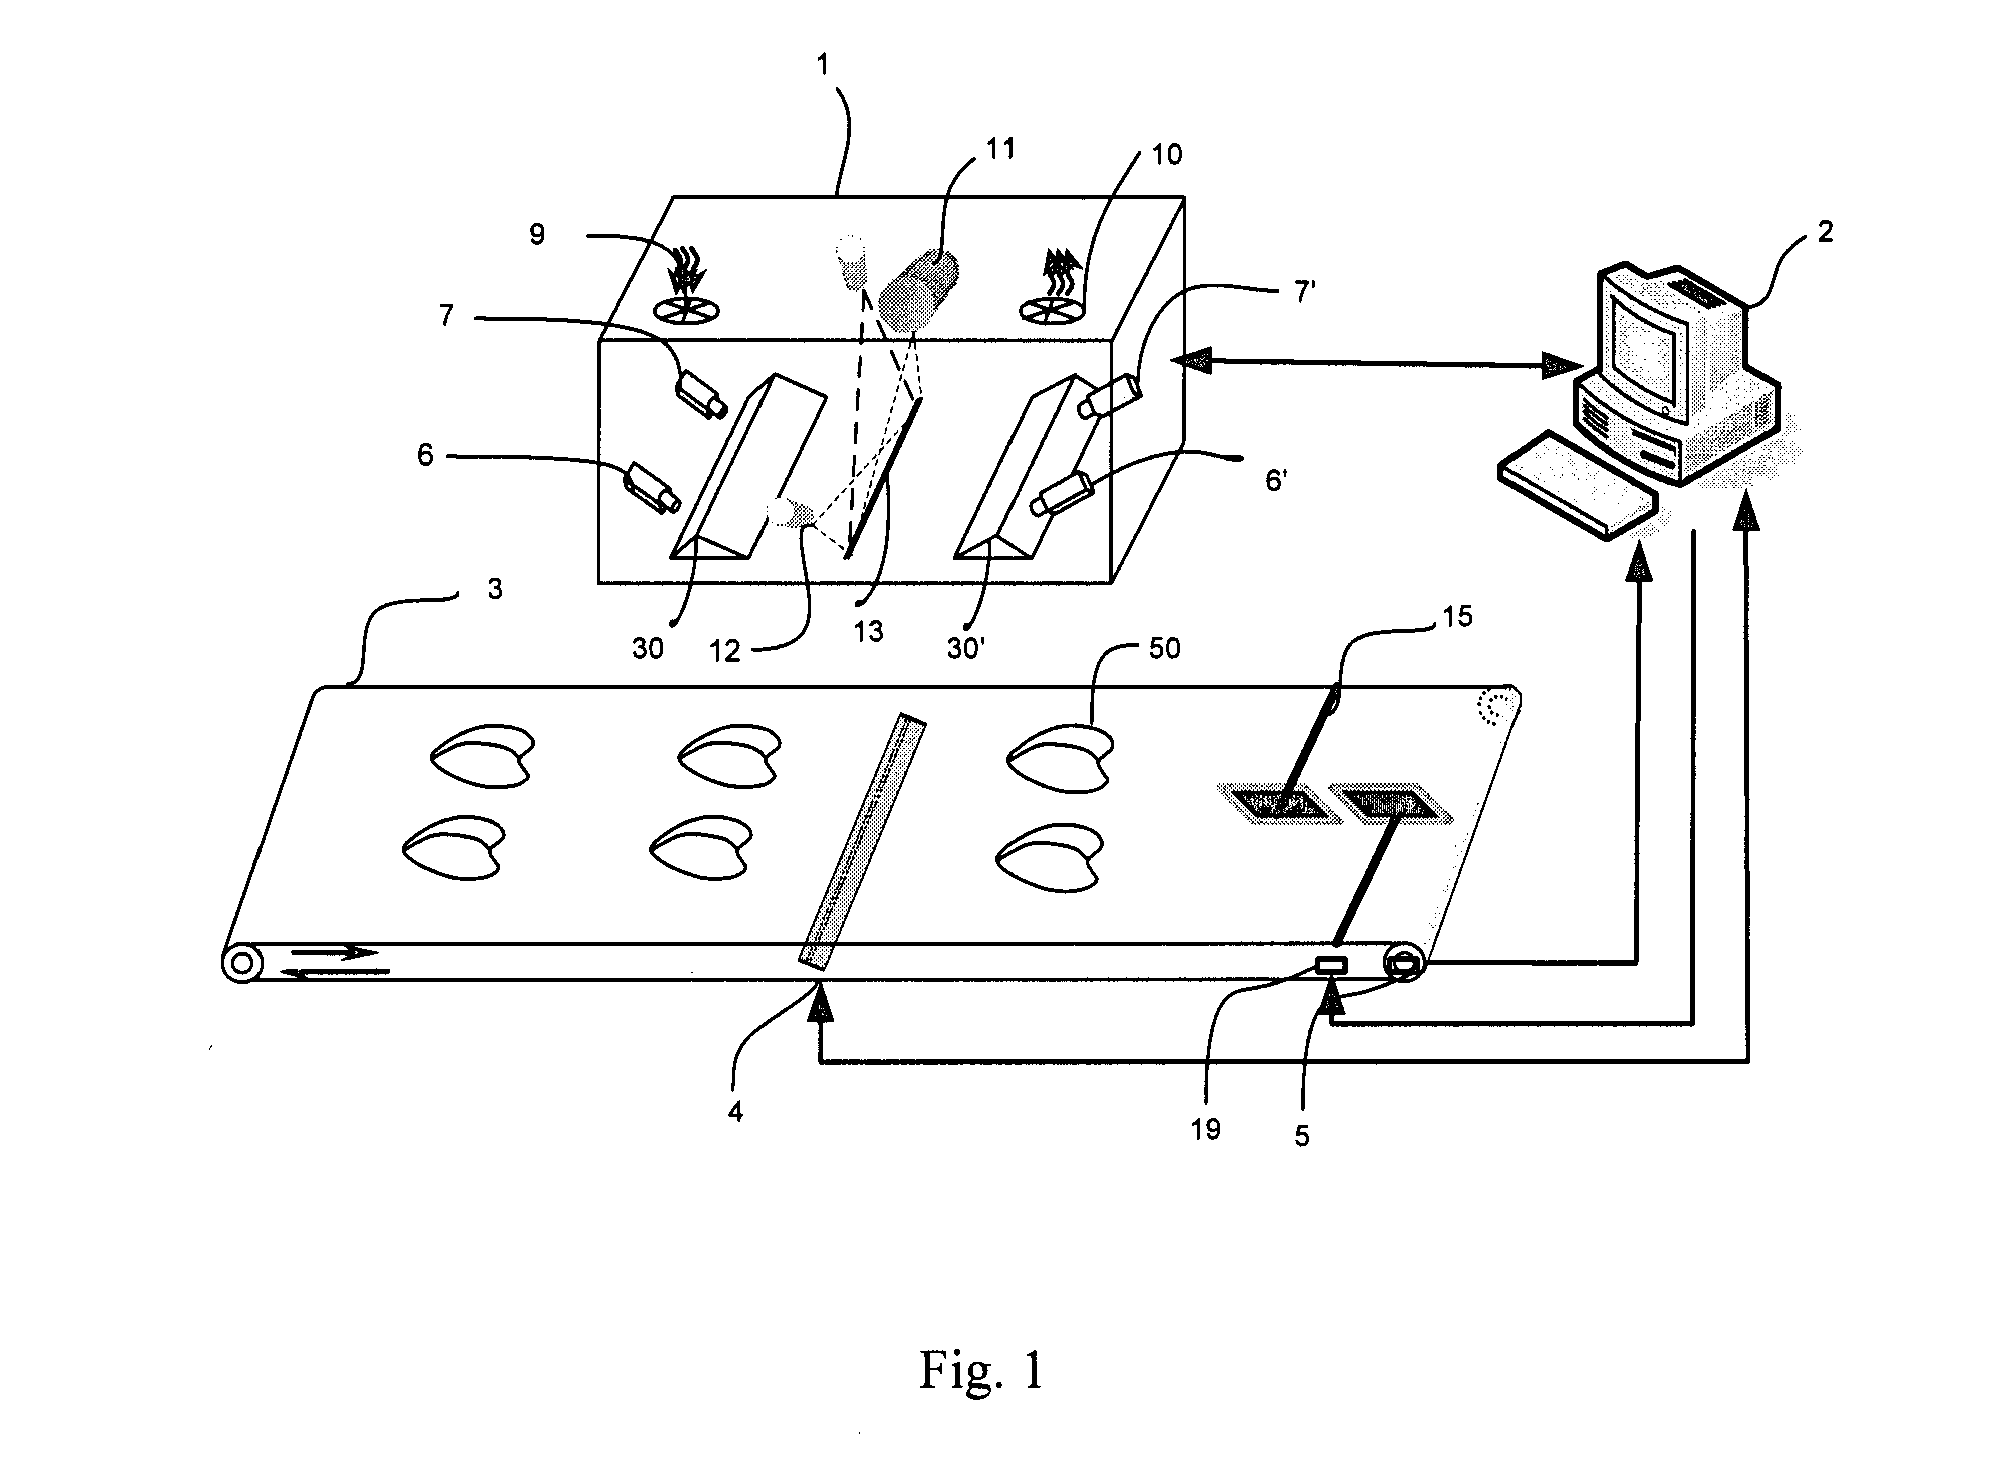 Machine imaging apparatus and method for detecting foreign materials